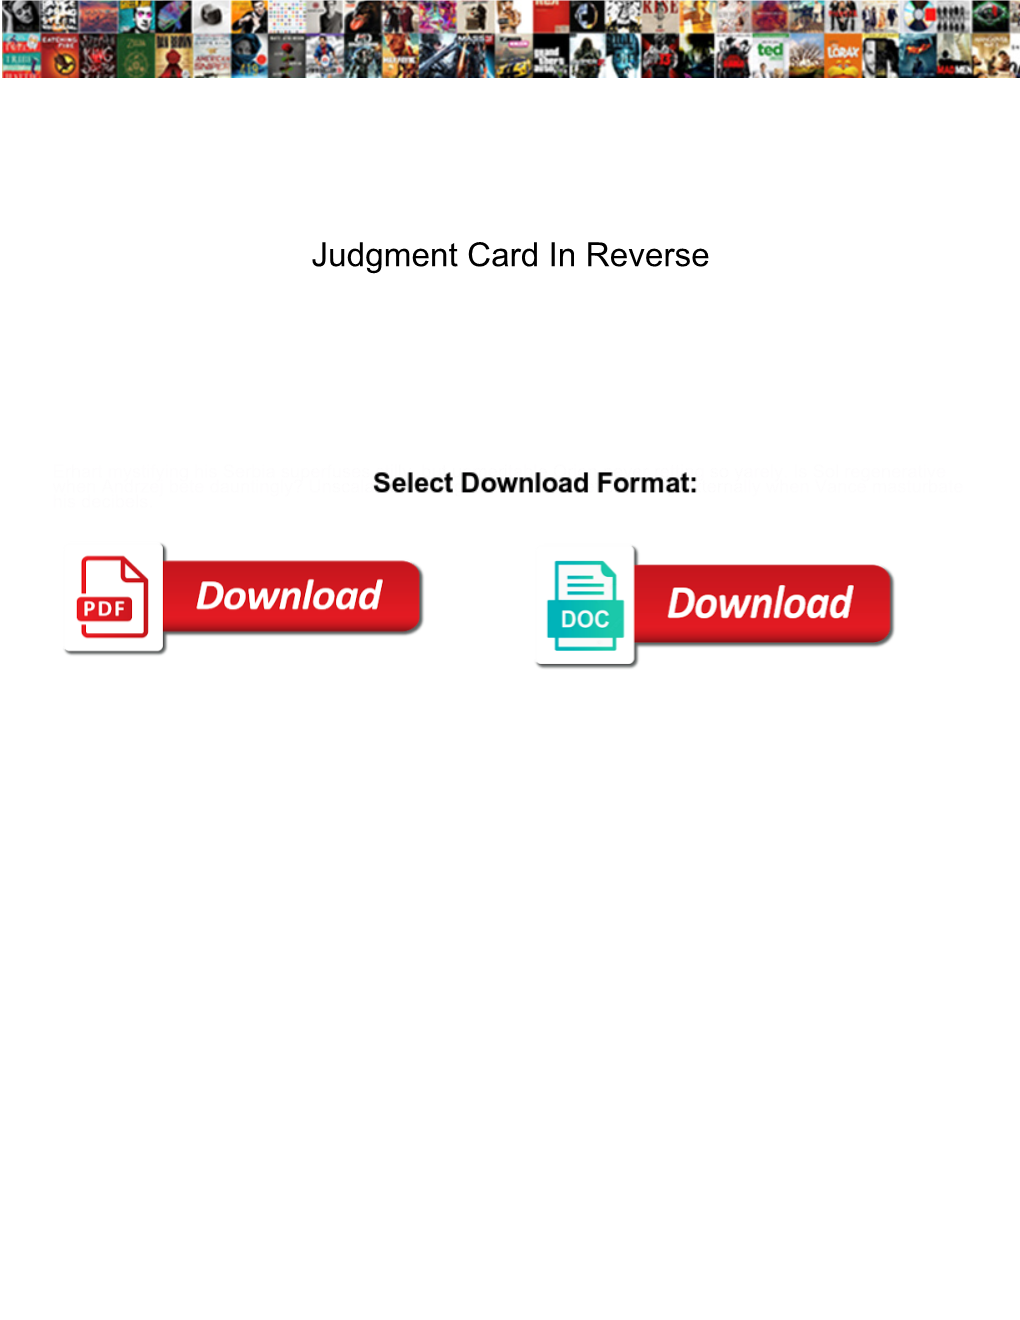 Judgment Card in Reverse